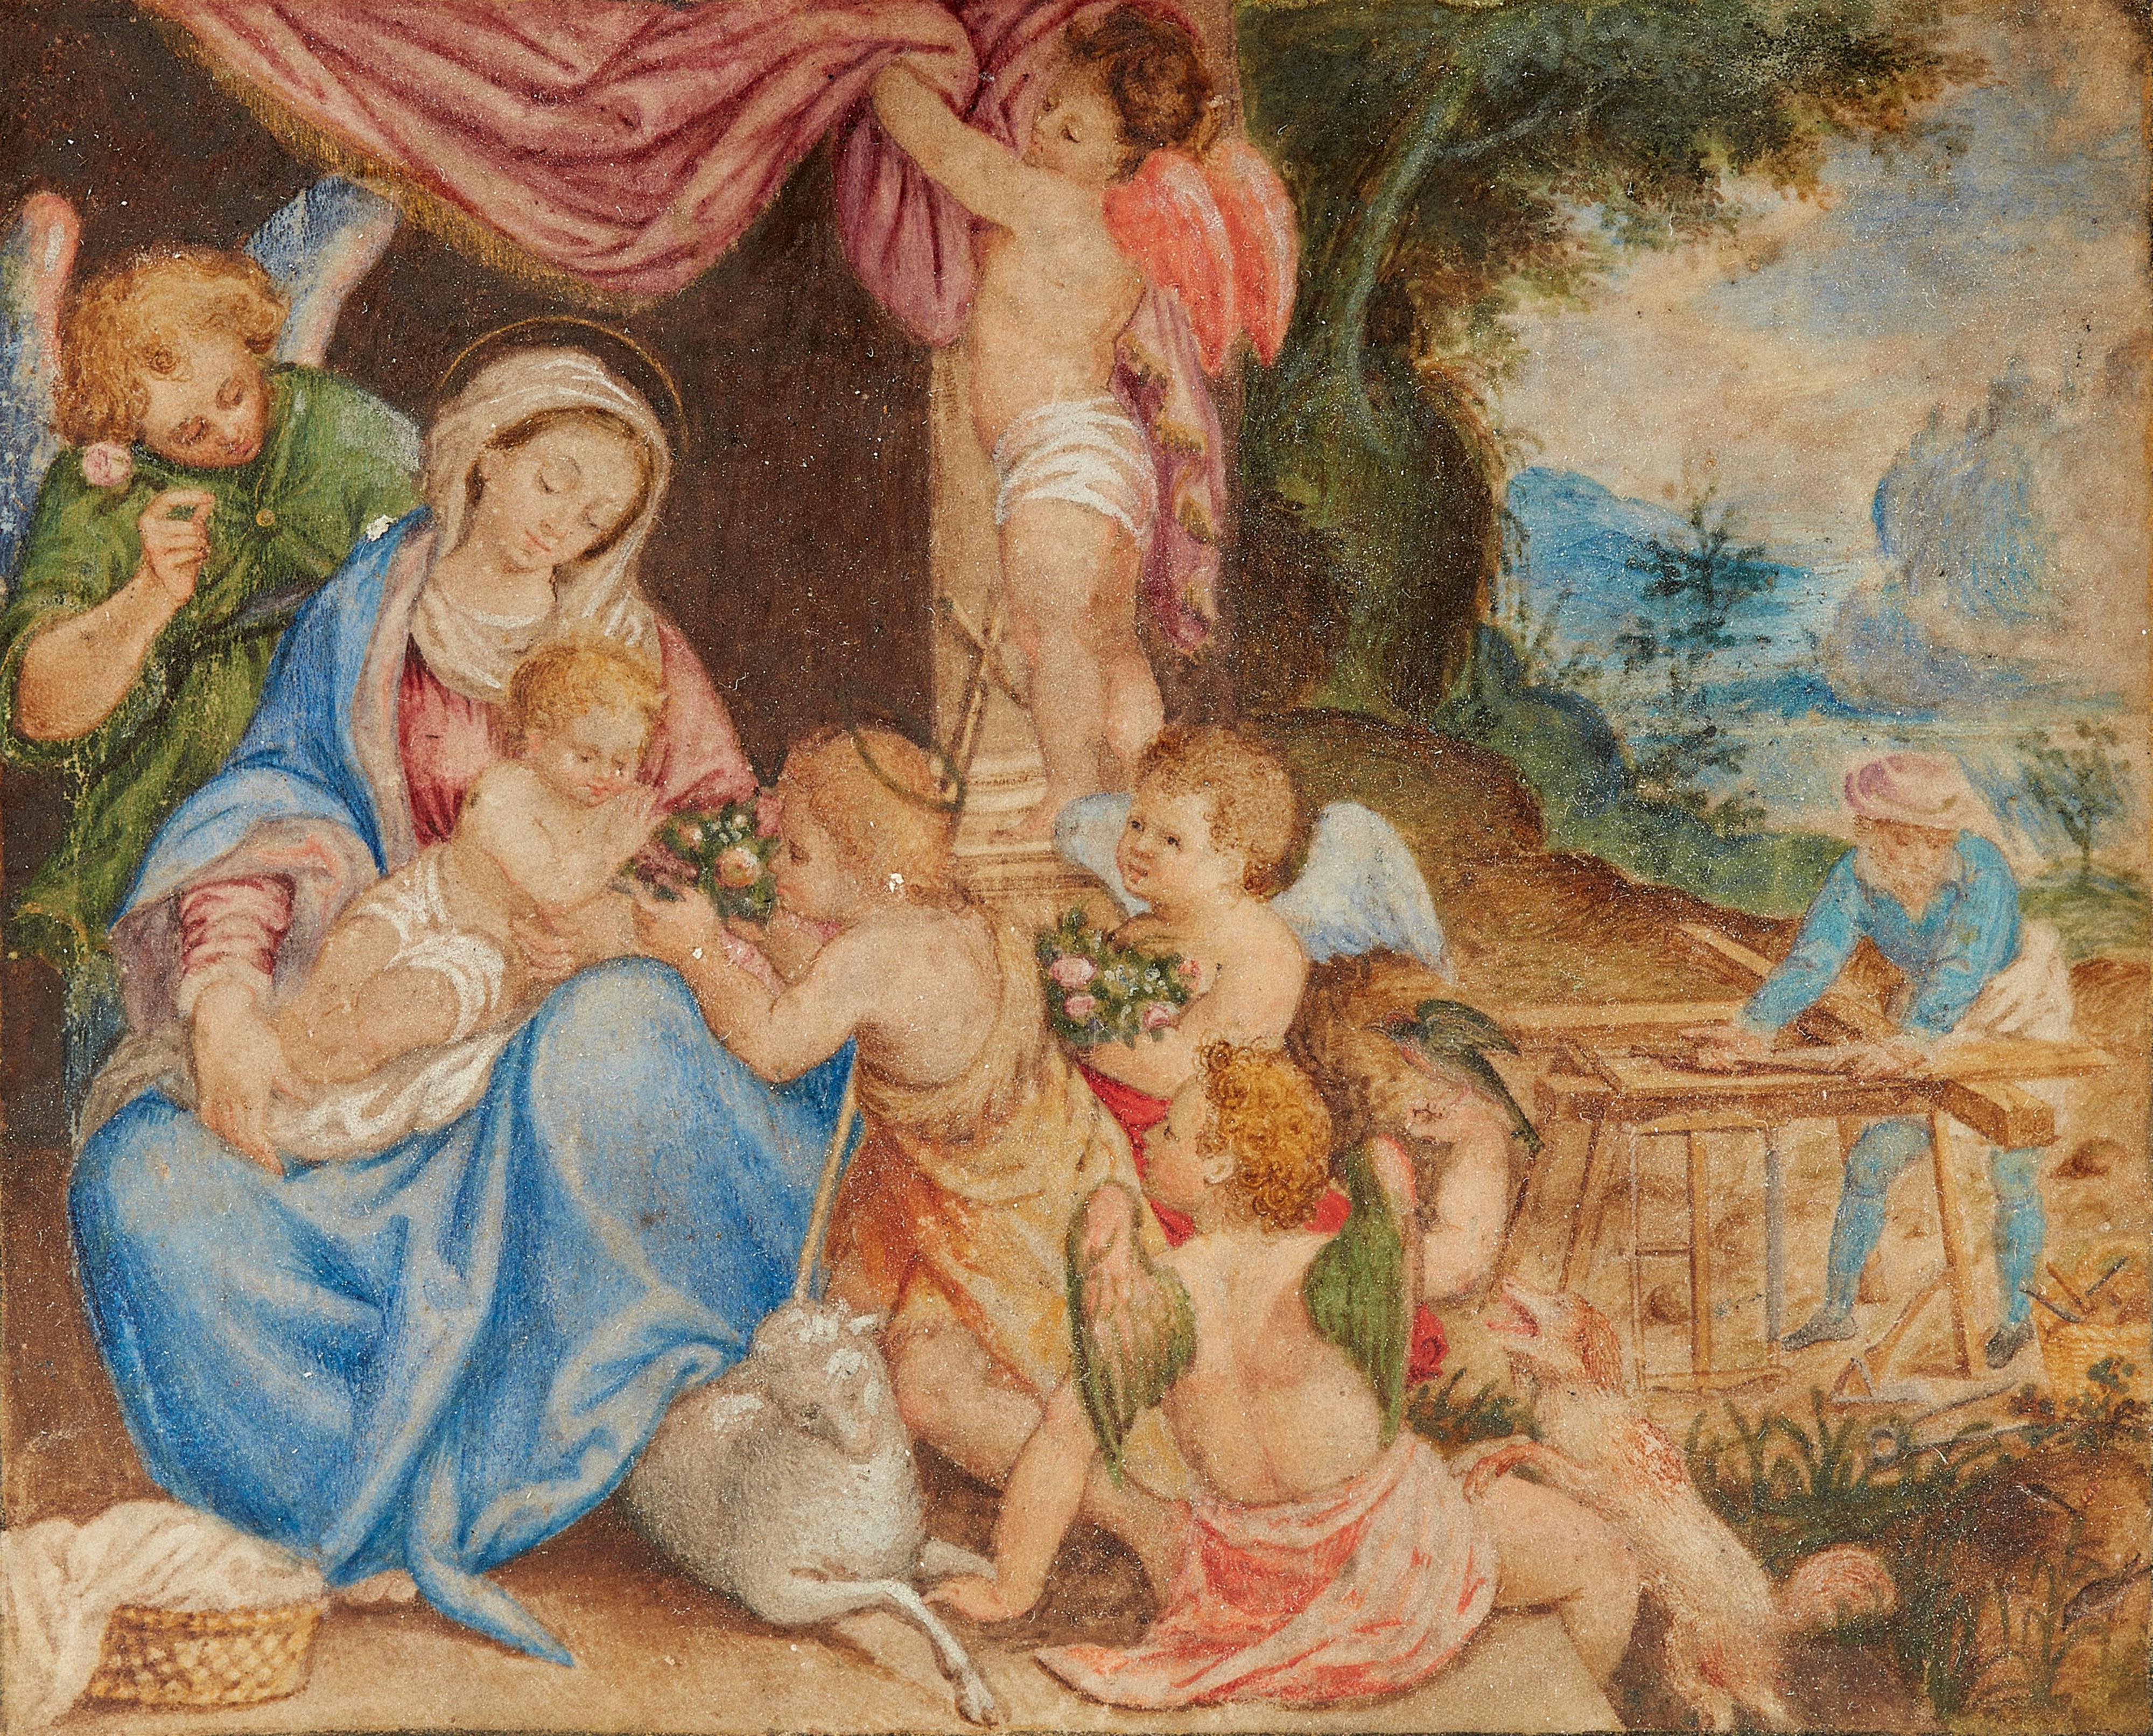 Netherlandish School, 16th century - Madonna with Child and Angels before a Wide Landscape - image-1